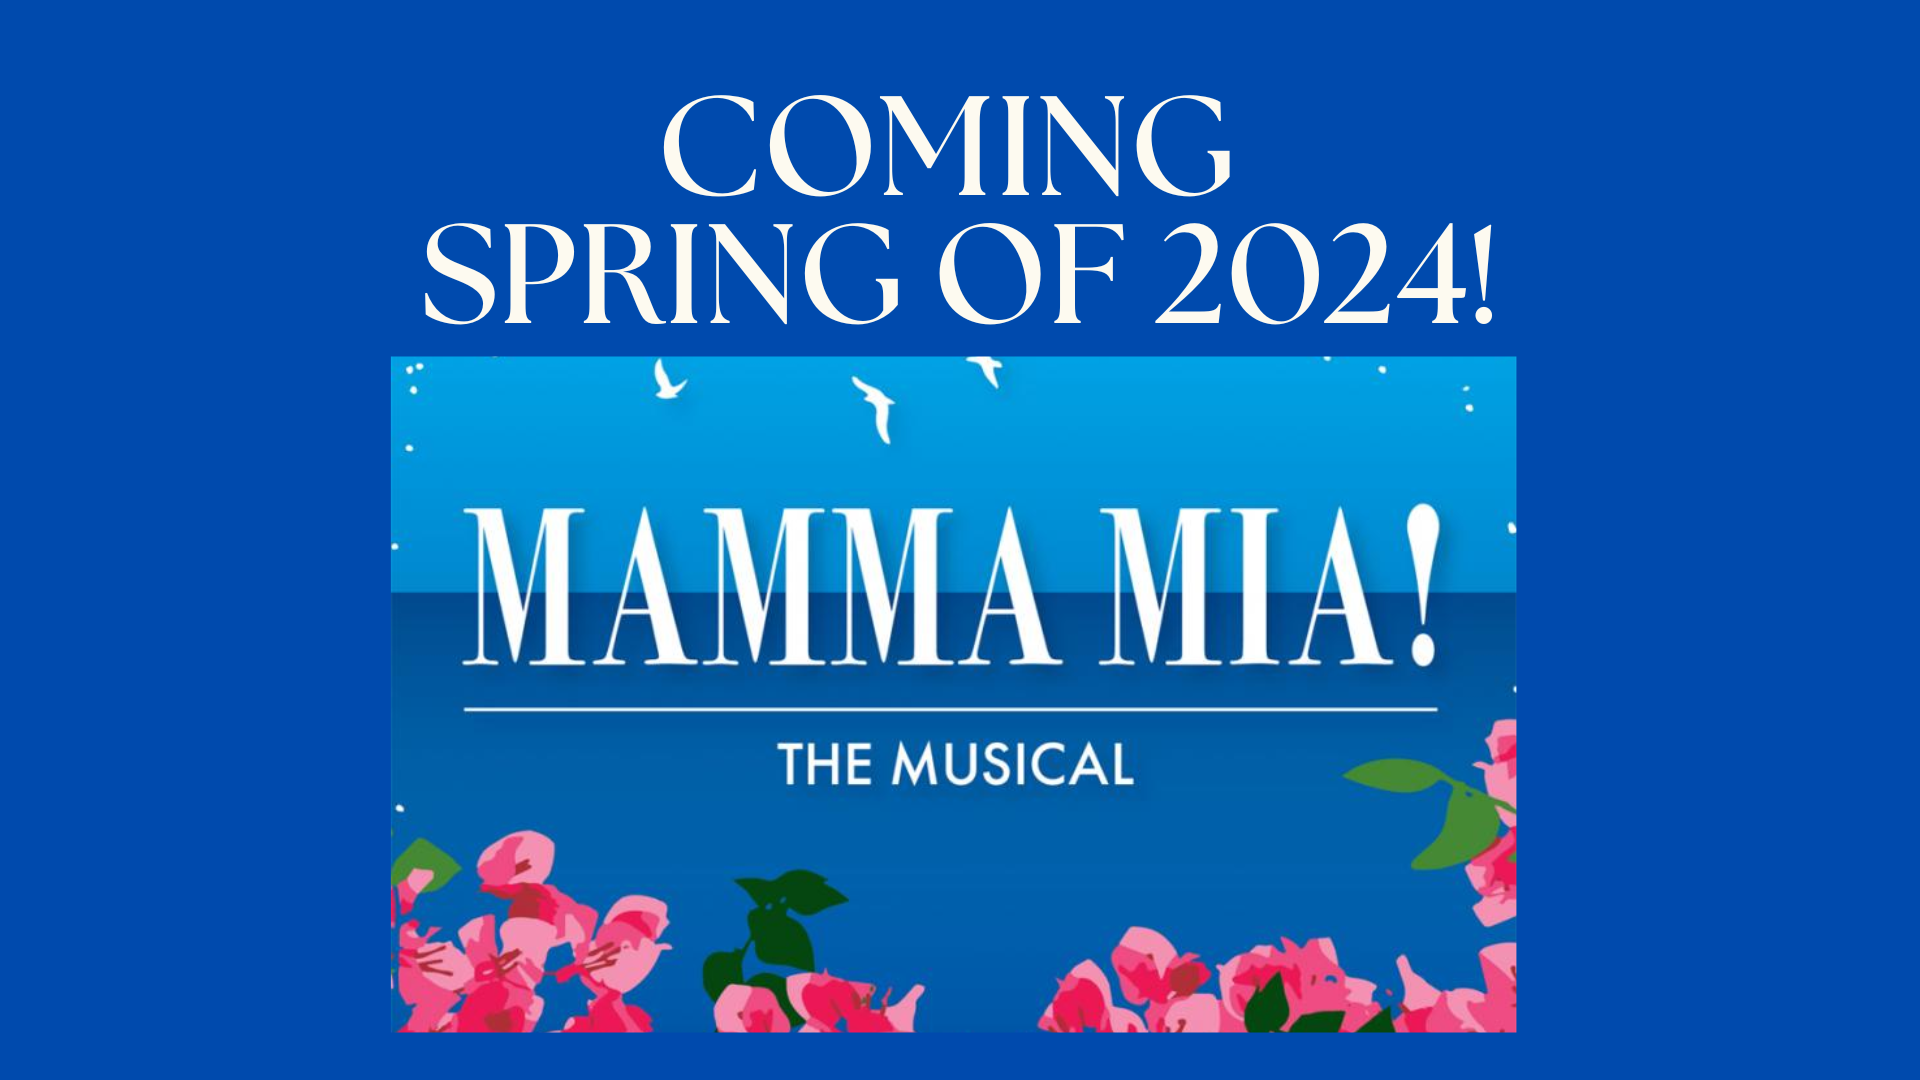 Coming Soon Spring of 2024 Mamma Mia the Musical